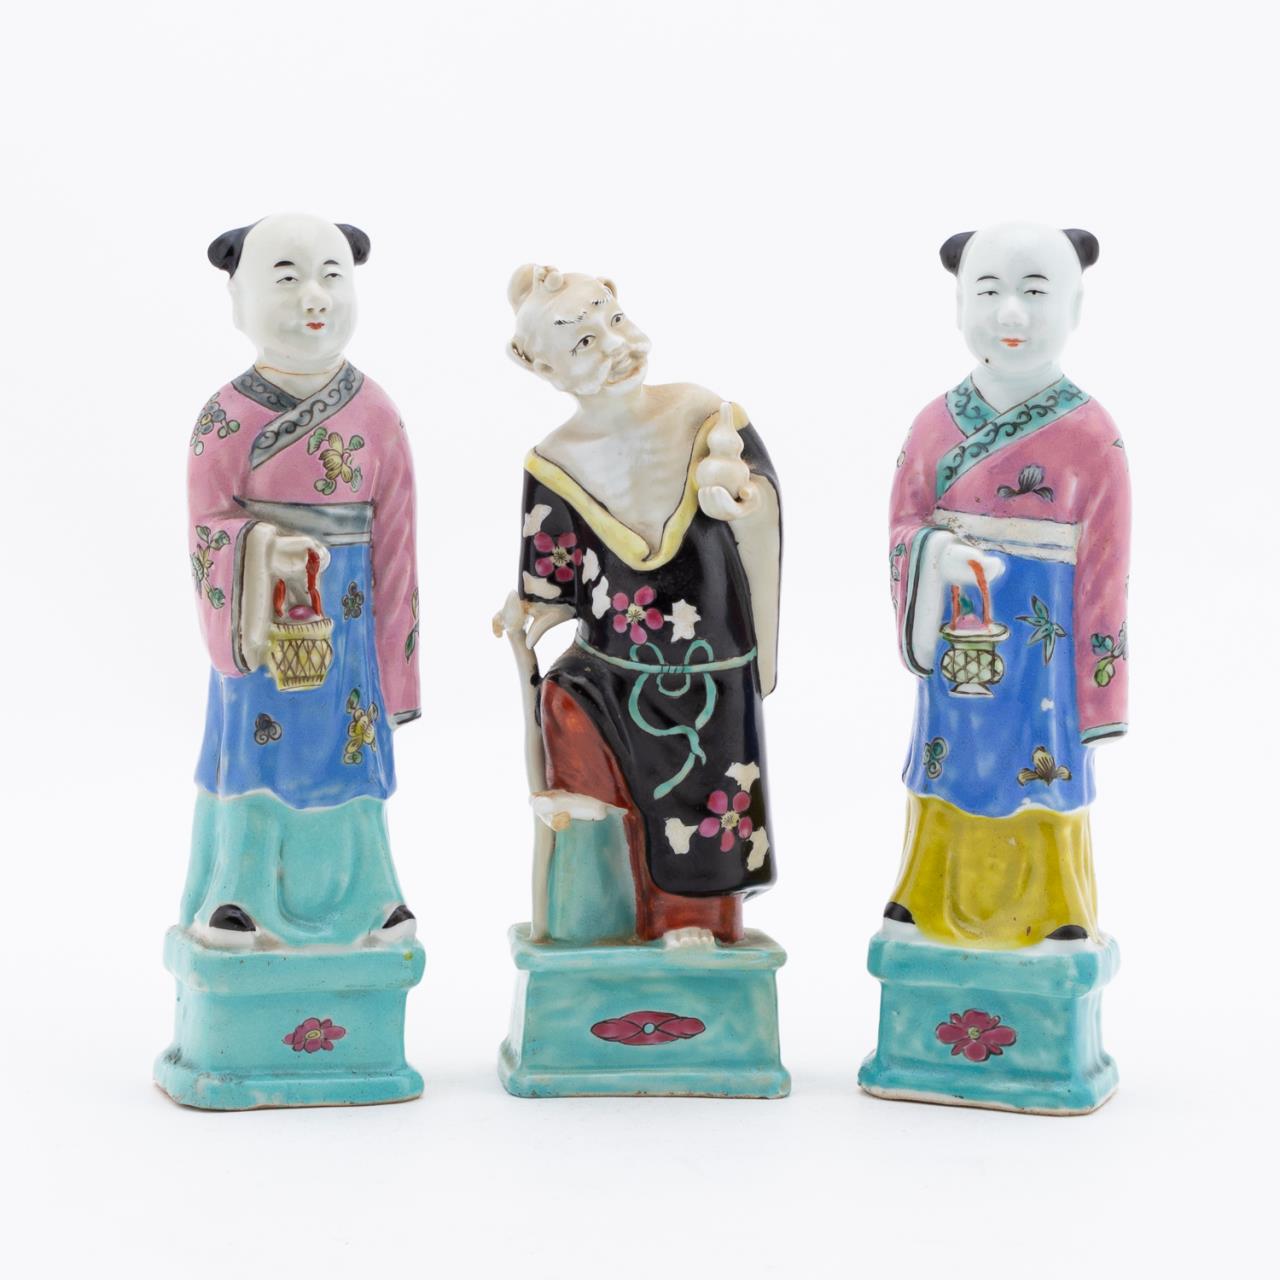 3 CHINESE PORCELAIN FIGURES ON